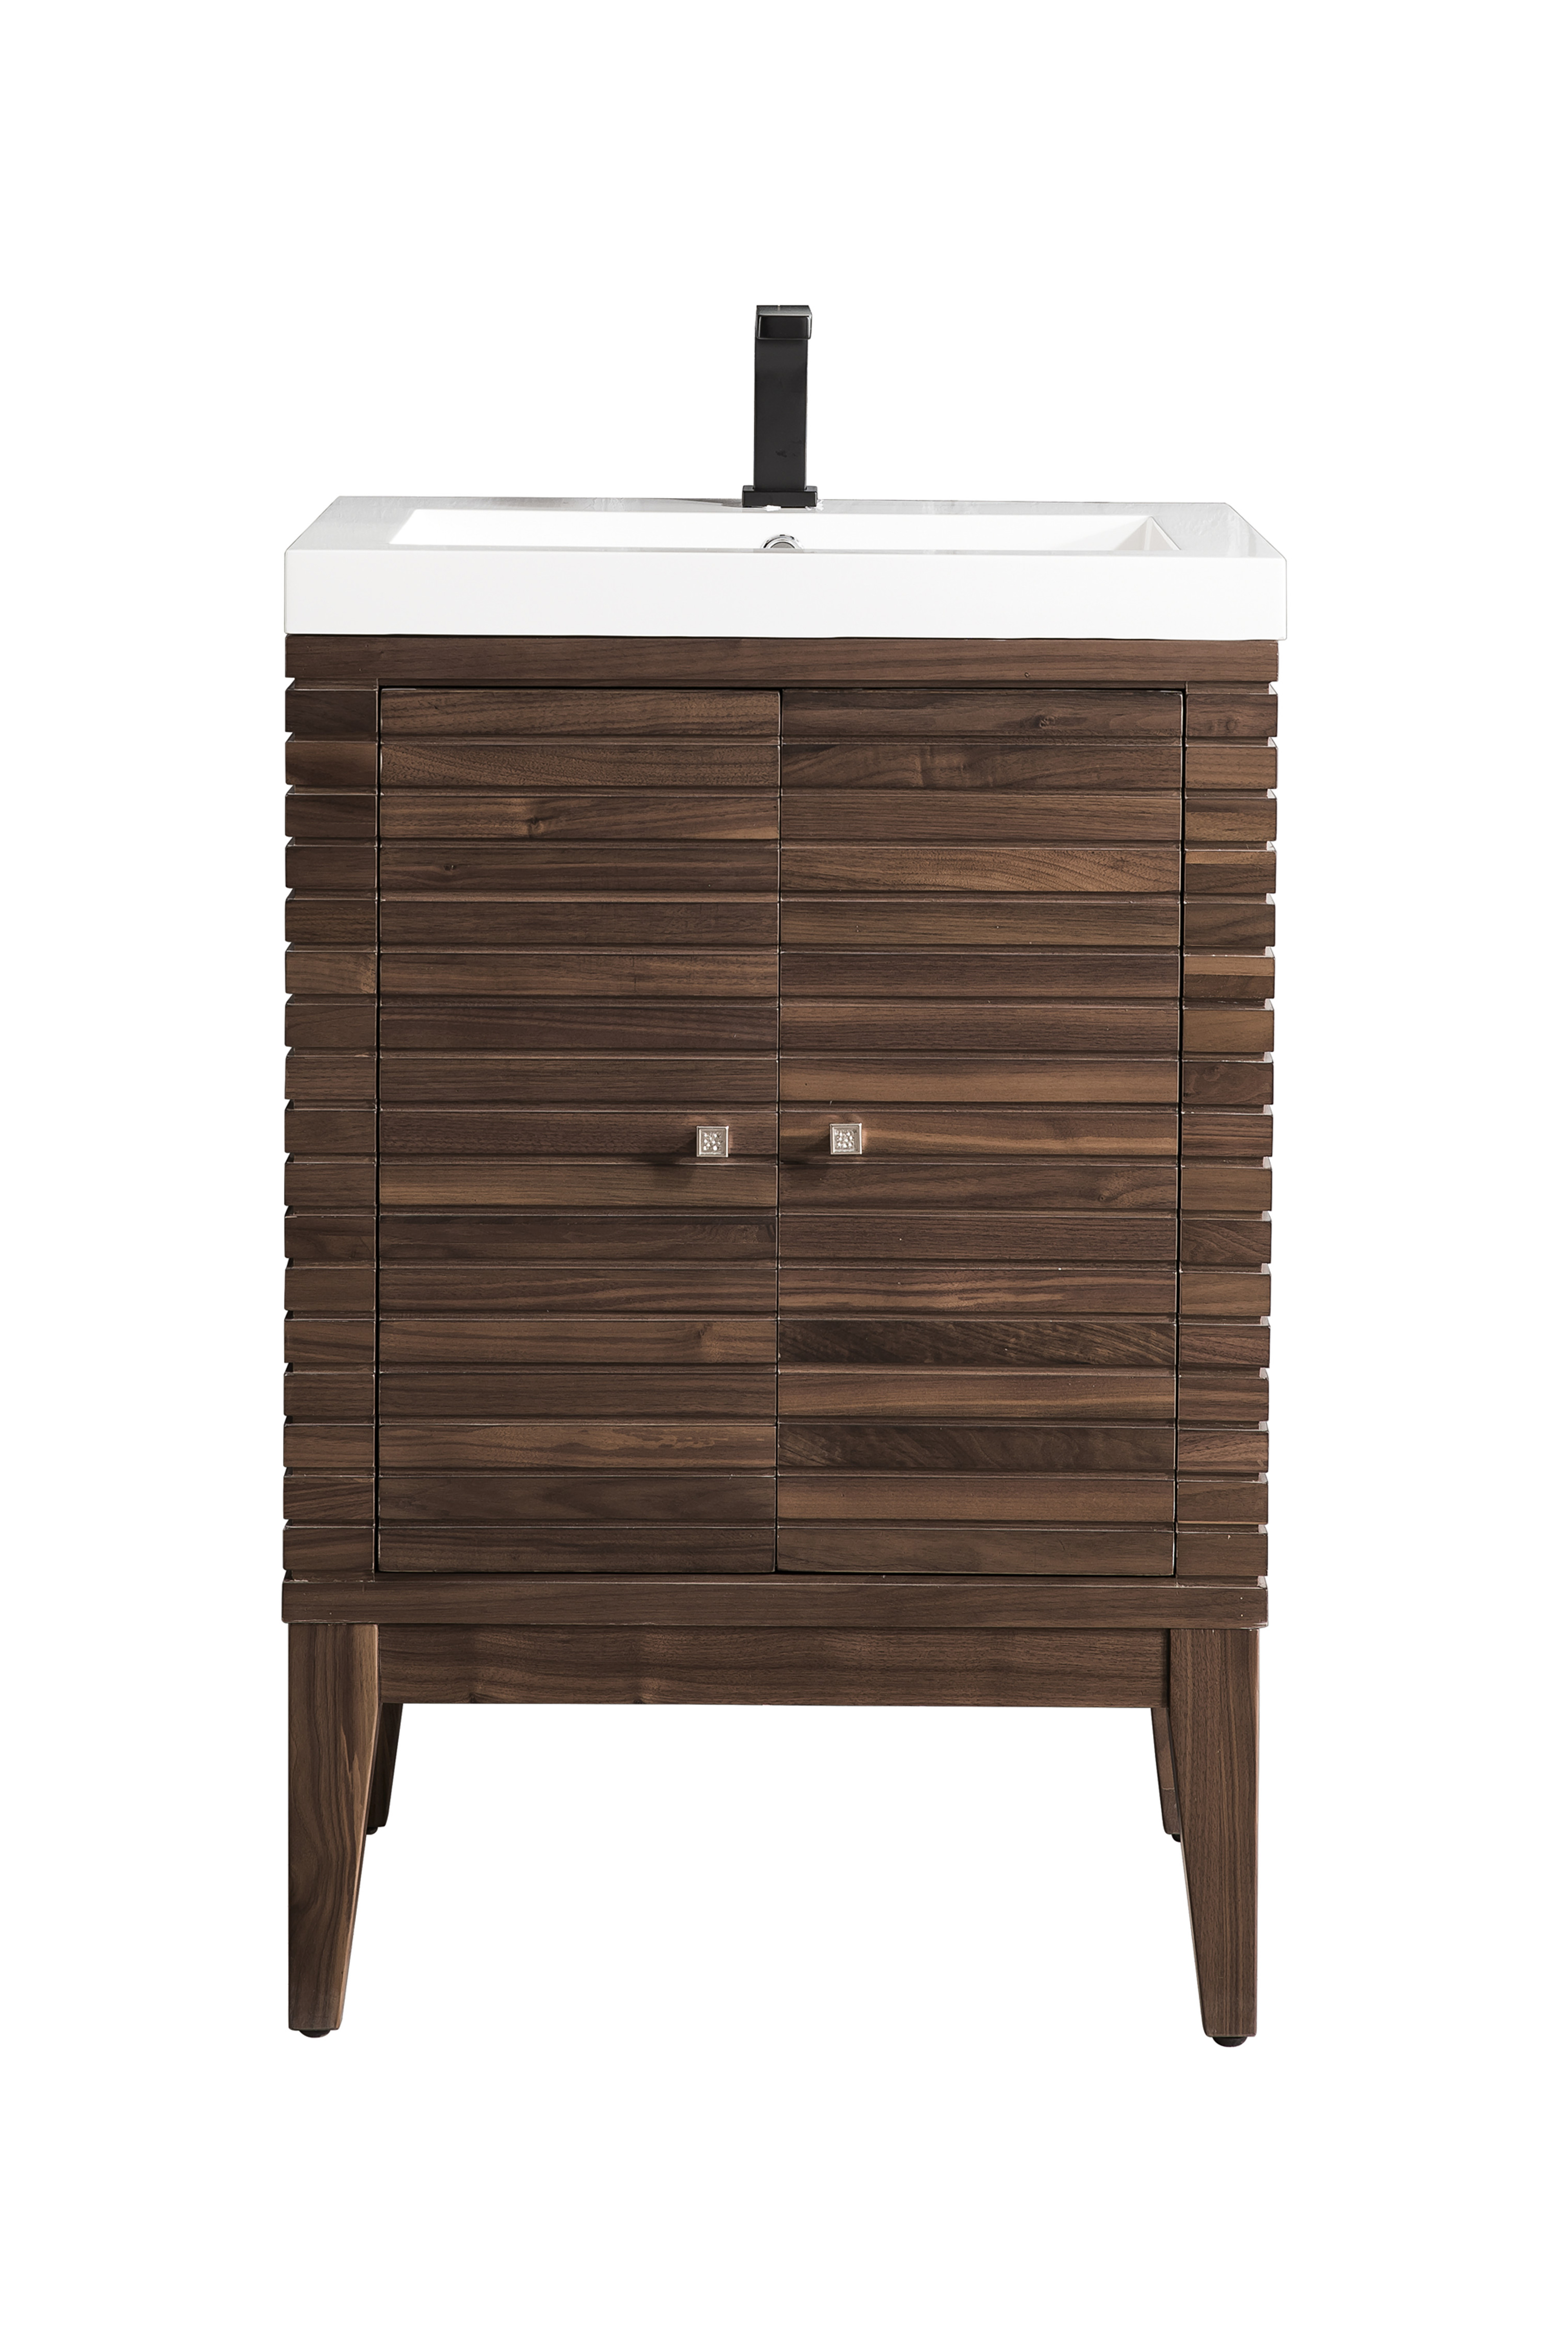 James Martin E213V24WLTWG Linden 24" Single Vanity Cabinet, Mid Century Walnut w/ White Glossy Composite Countertop - Click Image to Close